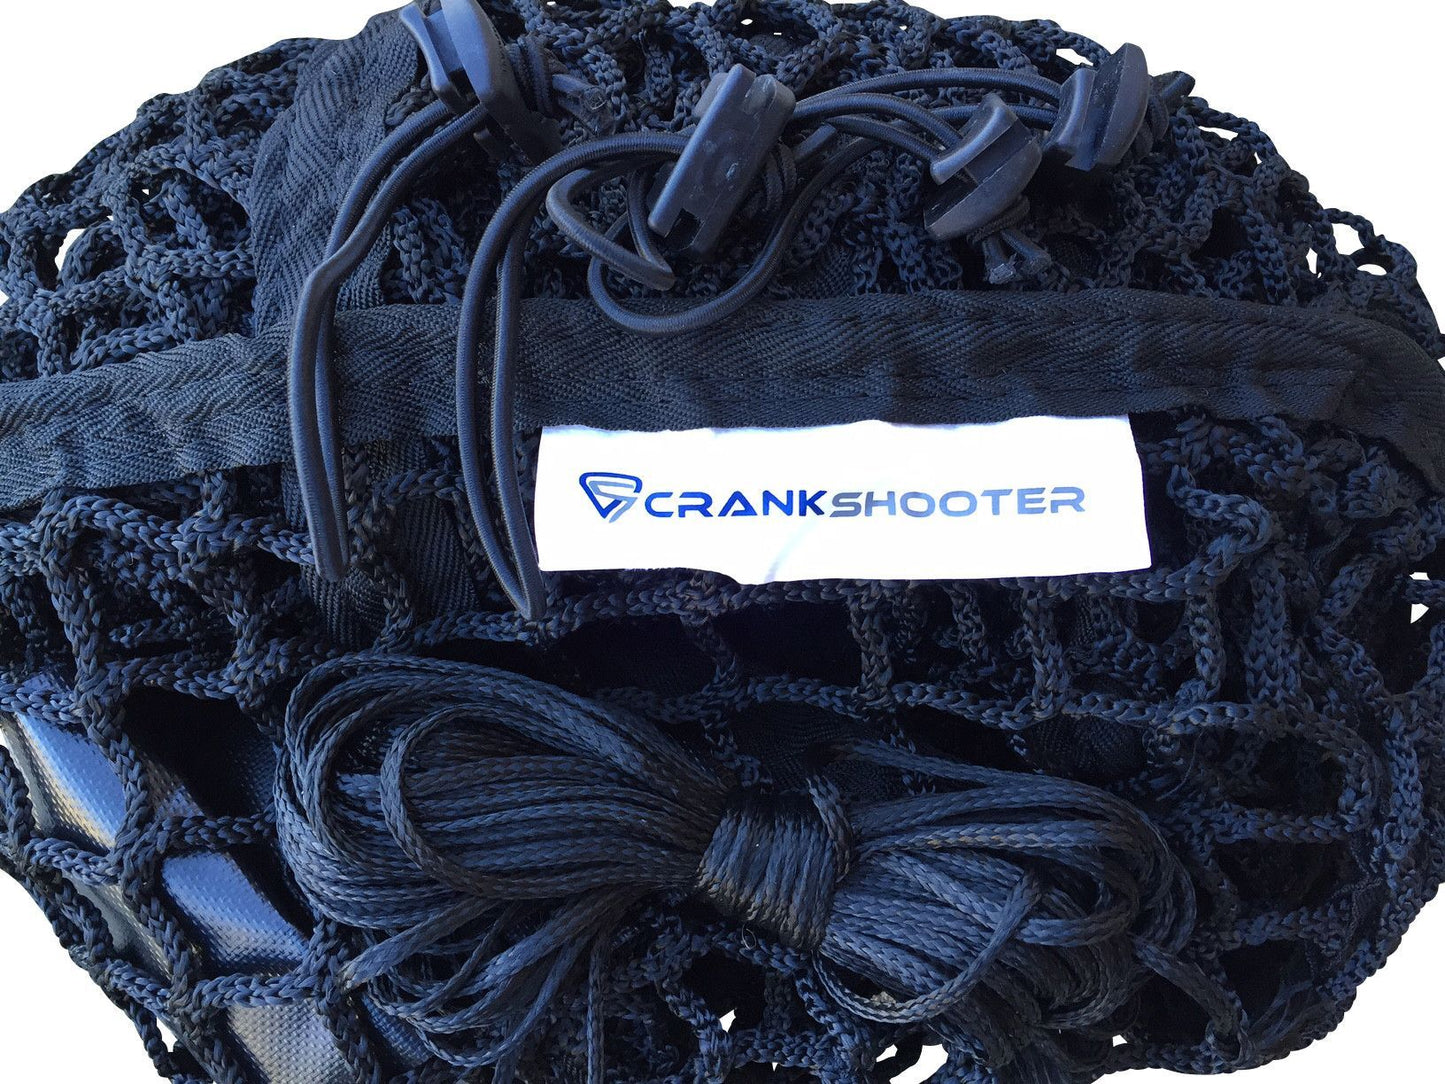 (4'9" x 4ft x 5ft) 6mm Black or White BOX Lacrosse Net - by CrankShooter® - FREE Shipping